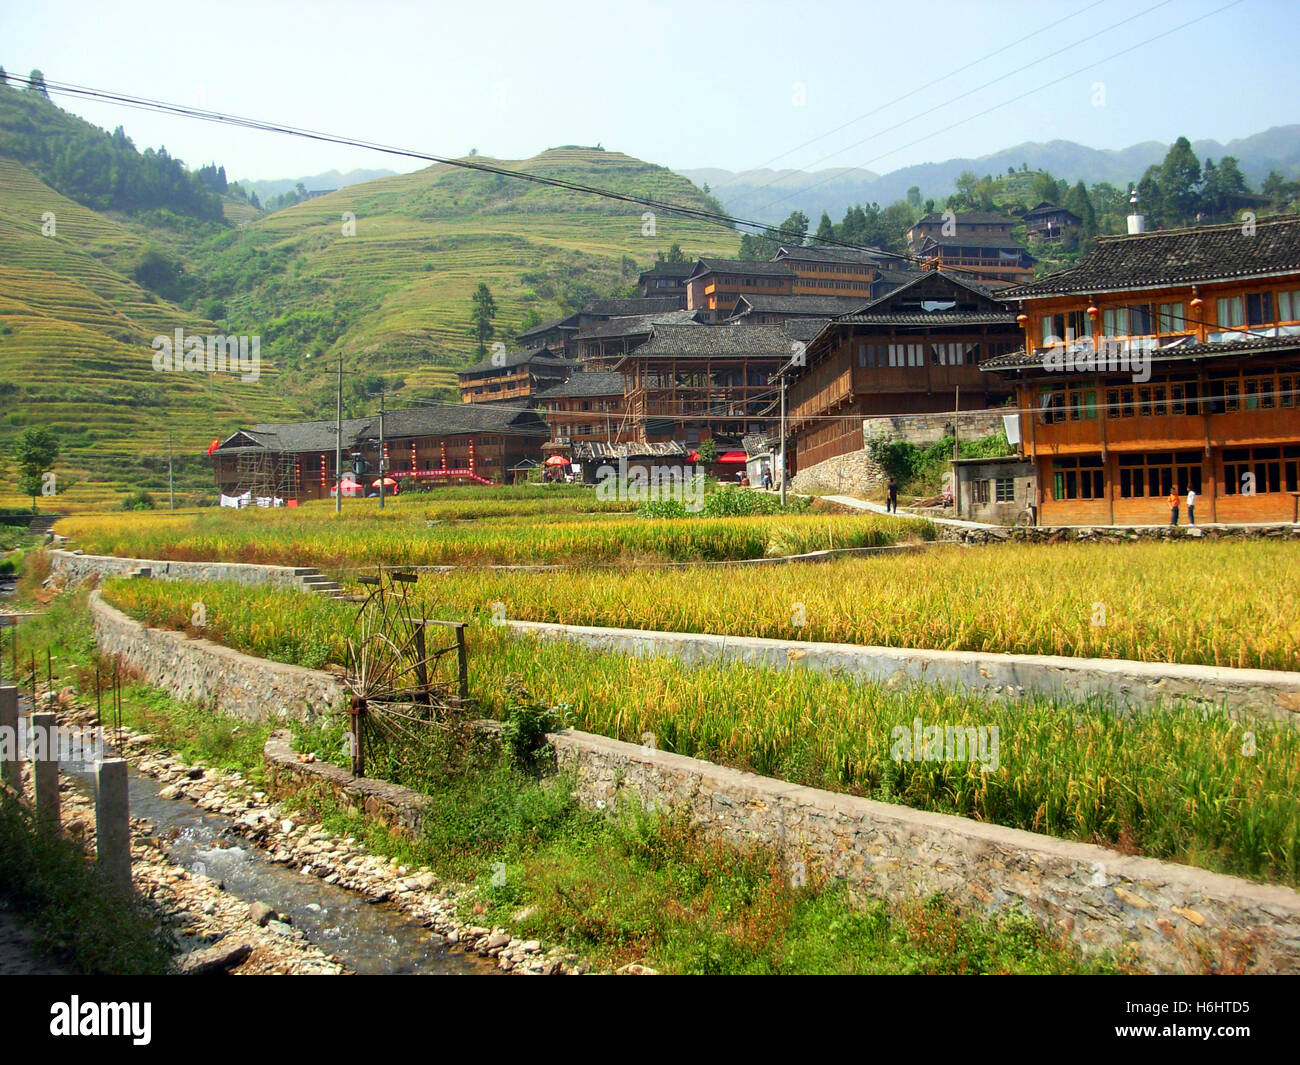 Wooden houses inside Dazhai traditional village, Guilin, Guangxi province, China Stock Photo